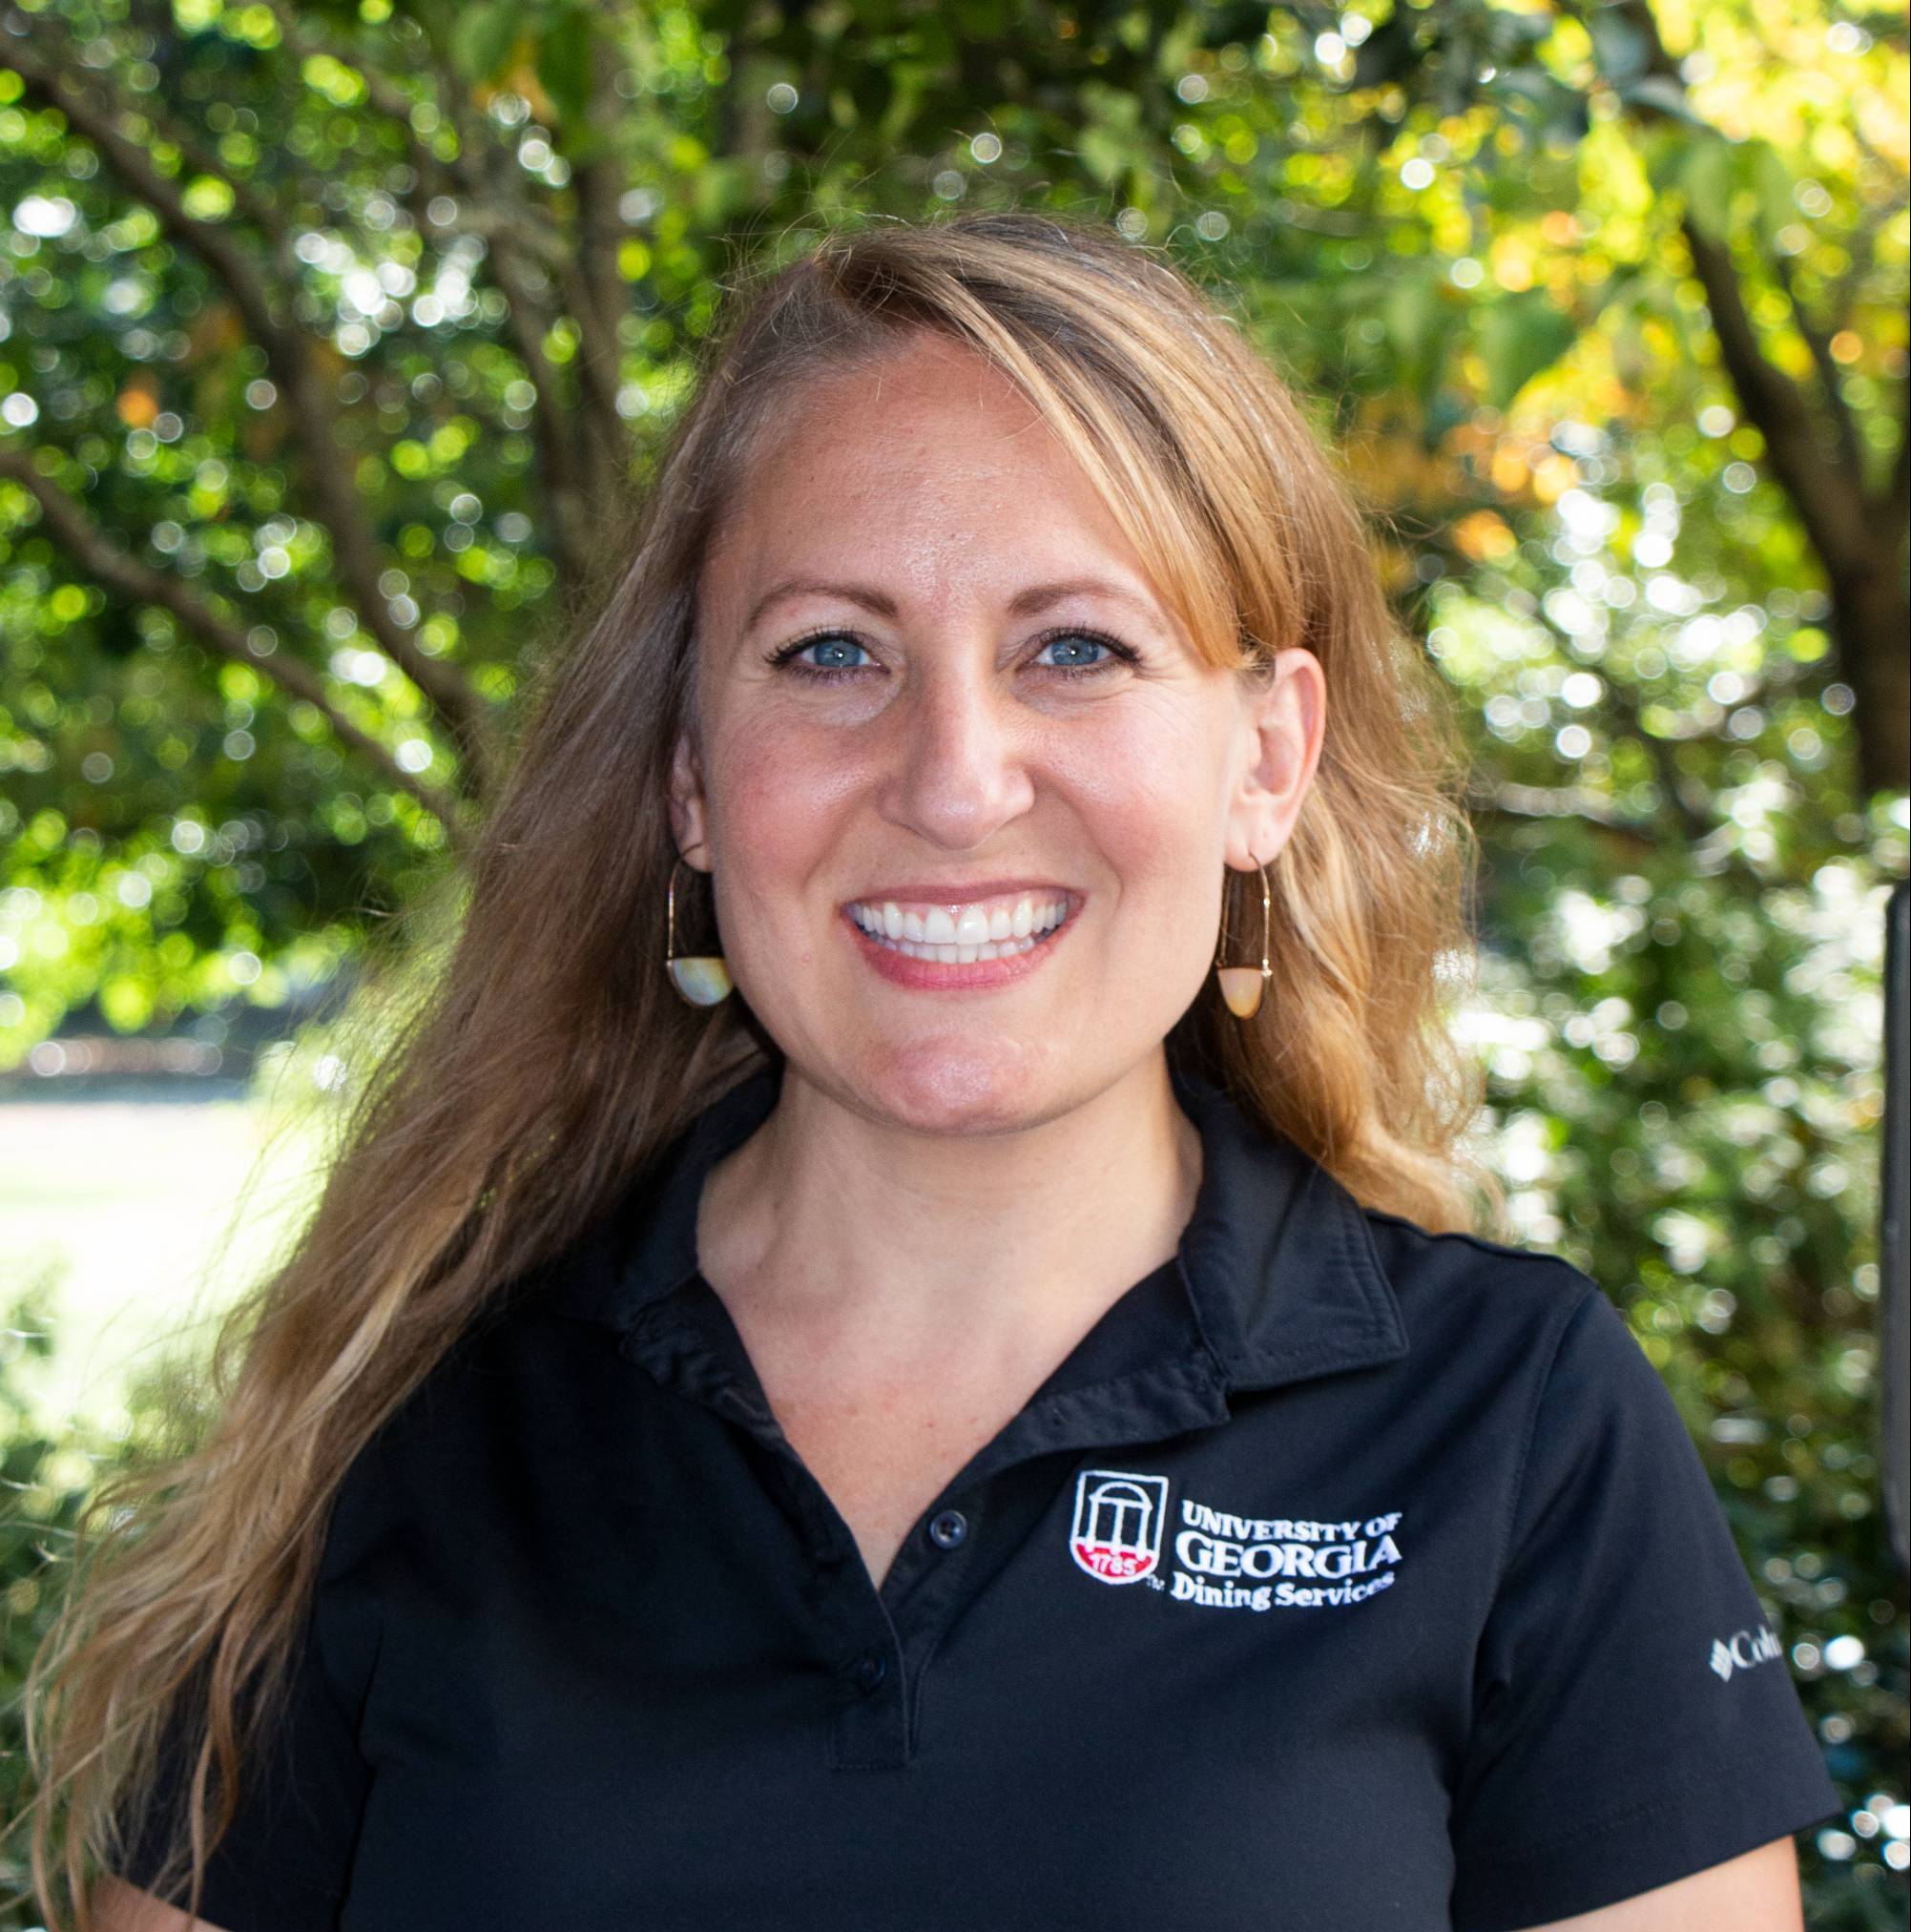 A woman with long blonde hair wearing gold earings and a black shirt with the words "University of Georgia, Dining Services" smiles at the camera.